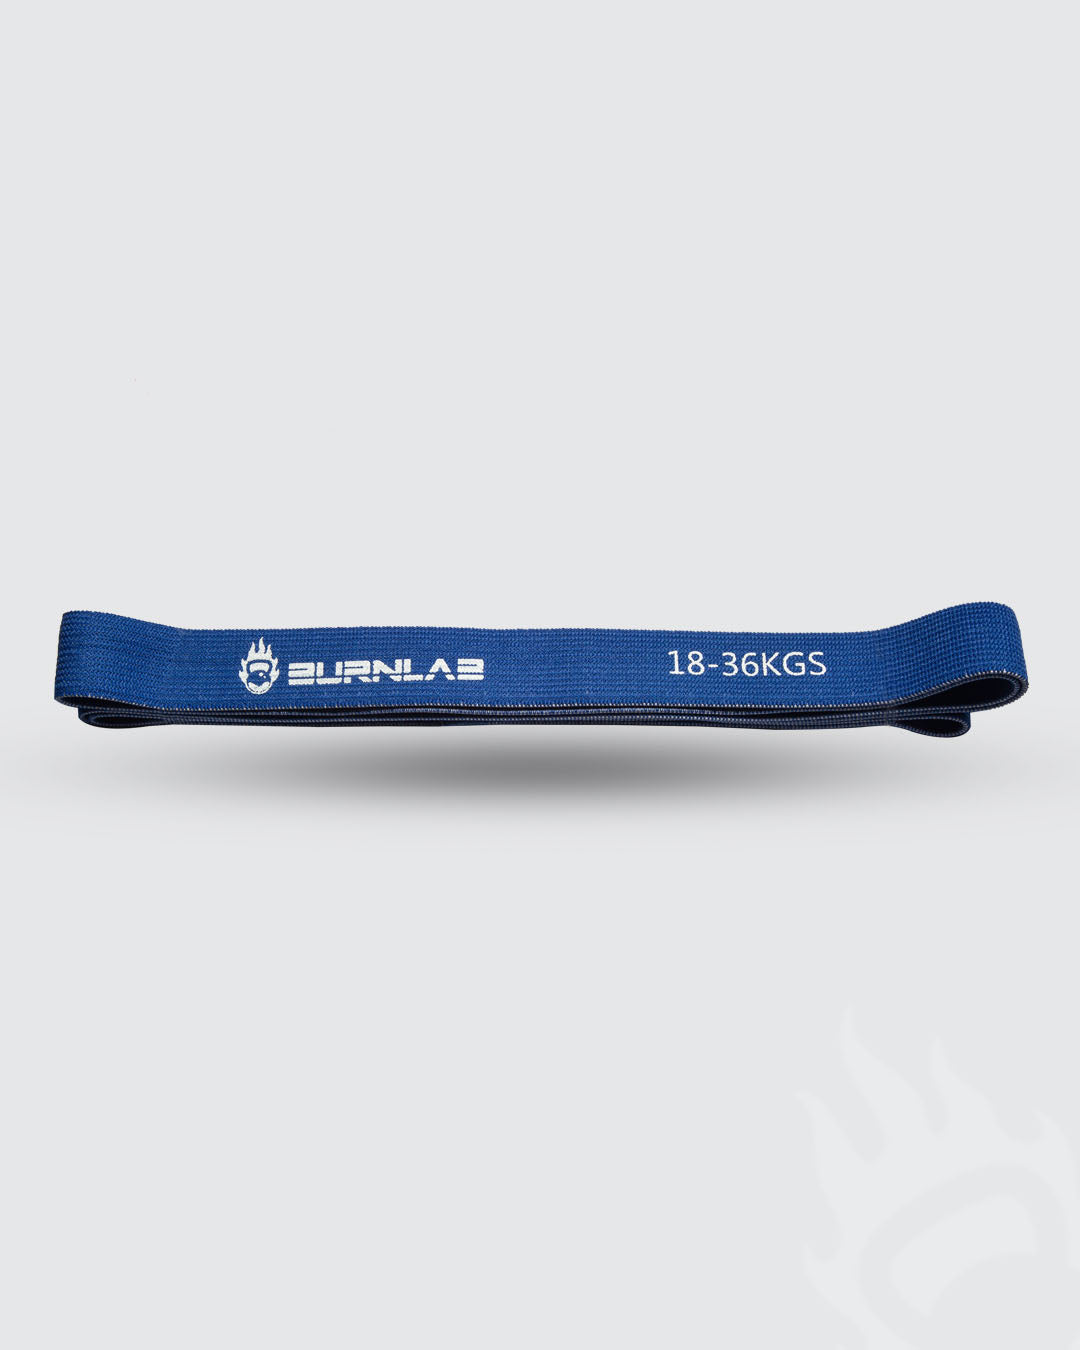 Fabric Resistance Band For Strength Training, Stretching and Pull Up Assist - Burnlab.Co